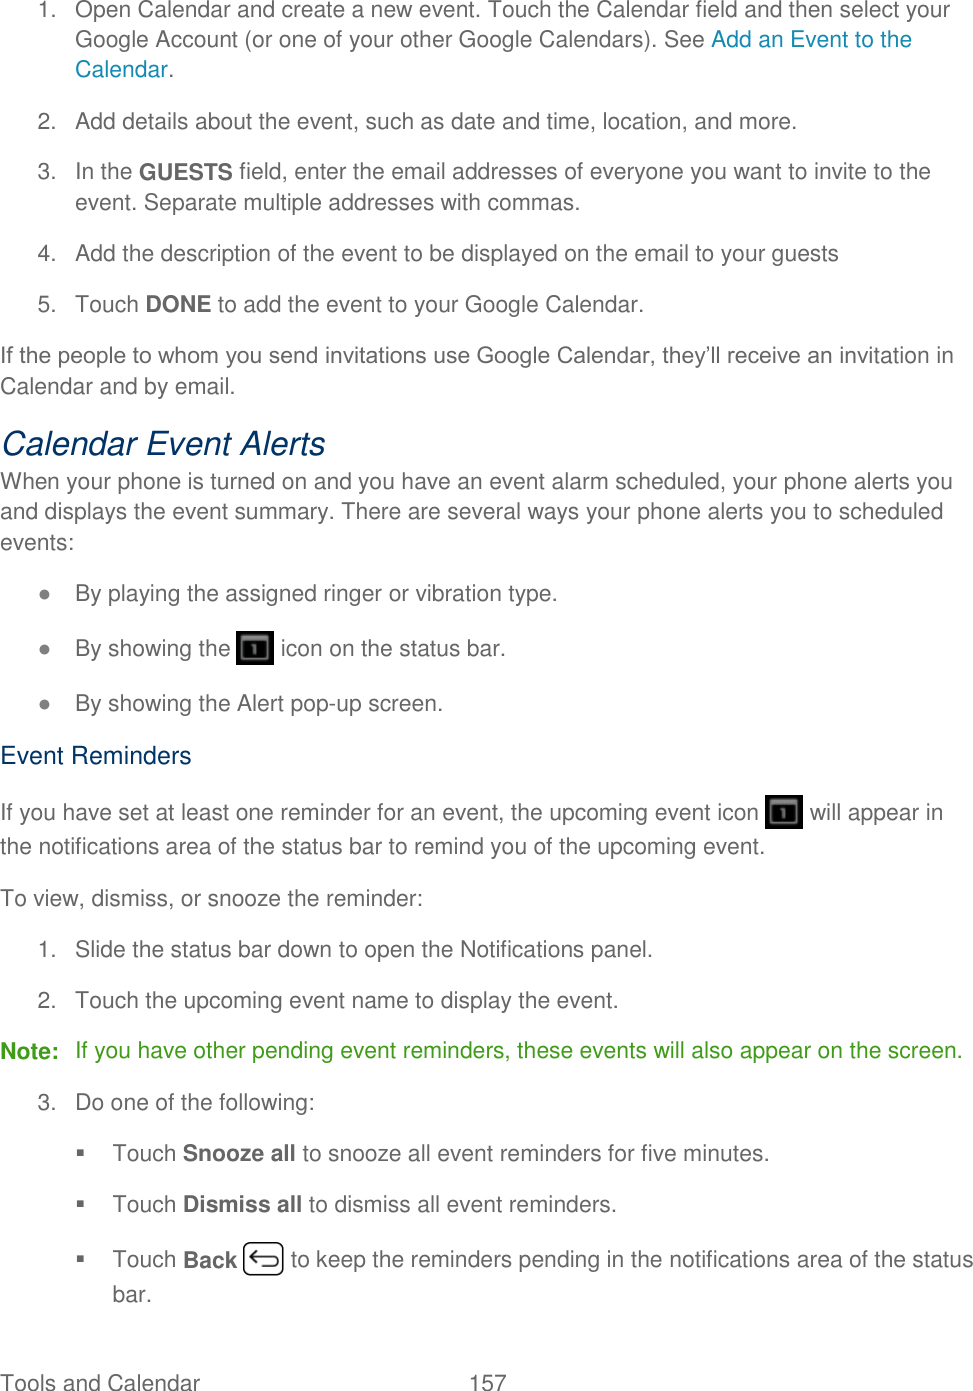 Tools and Calendar  157   1.  Open Calendar and create a new event. Touch the Calendar field and then select your Google Account (or one of your other Google Calendars). See Add an Event to the Calendar. 2.  Add details about the event, such as date and time, location, and more. 3.  In the GUESTS field, enter the email addresses of everyone you want to invite to the event. Separate multiple addresses with commas. 4.  Add the description of the event to be displayed on the email to your guests  5.  Touch DONE to add the event to your Google Calendar. If the people to whom you send invitations use Google Calendar, they’ll receive an invitation in Calendar and by email. Calendar Event Alerts When your phone is turned on and you have an event alarm scheduled, your phone alerts you and displays the event summary. There are several ways your phone alerts you to scheduled events: ● By playing the assigned ringer or vibration type. ● By showing the   icon on the status bar. ● By showing the Alert pop-up screen. Event Reminders If you have set at least one reminder for an event, the upcoming event icon   will appear in the notifications area of the status bar to remind you of the upcoming event. To view, dismiss, or snooze the reminder: 1.  Slide the status bar down to open the Notifications panel. 2.  Touch the upcoming event name to display the event. Note:  If you have other pending event reminders, these events will also appear on the screen.  3.  Do one of the following:   Touch Snooze all to snooze all event reminders for five minutes.   Touch Dismiss all to dismiss all event reminders.   Touch Back   to keep the reminders pending in the notifications area of the status bar. 